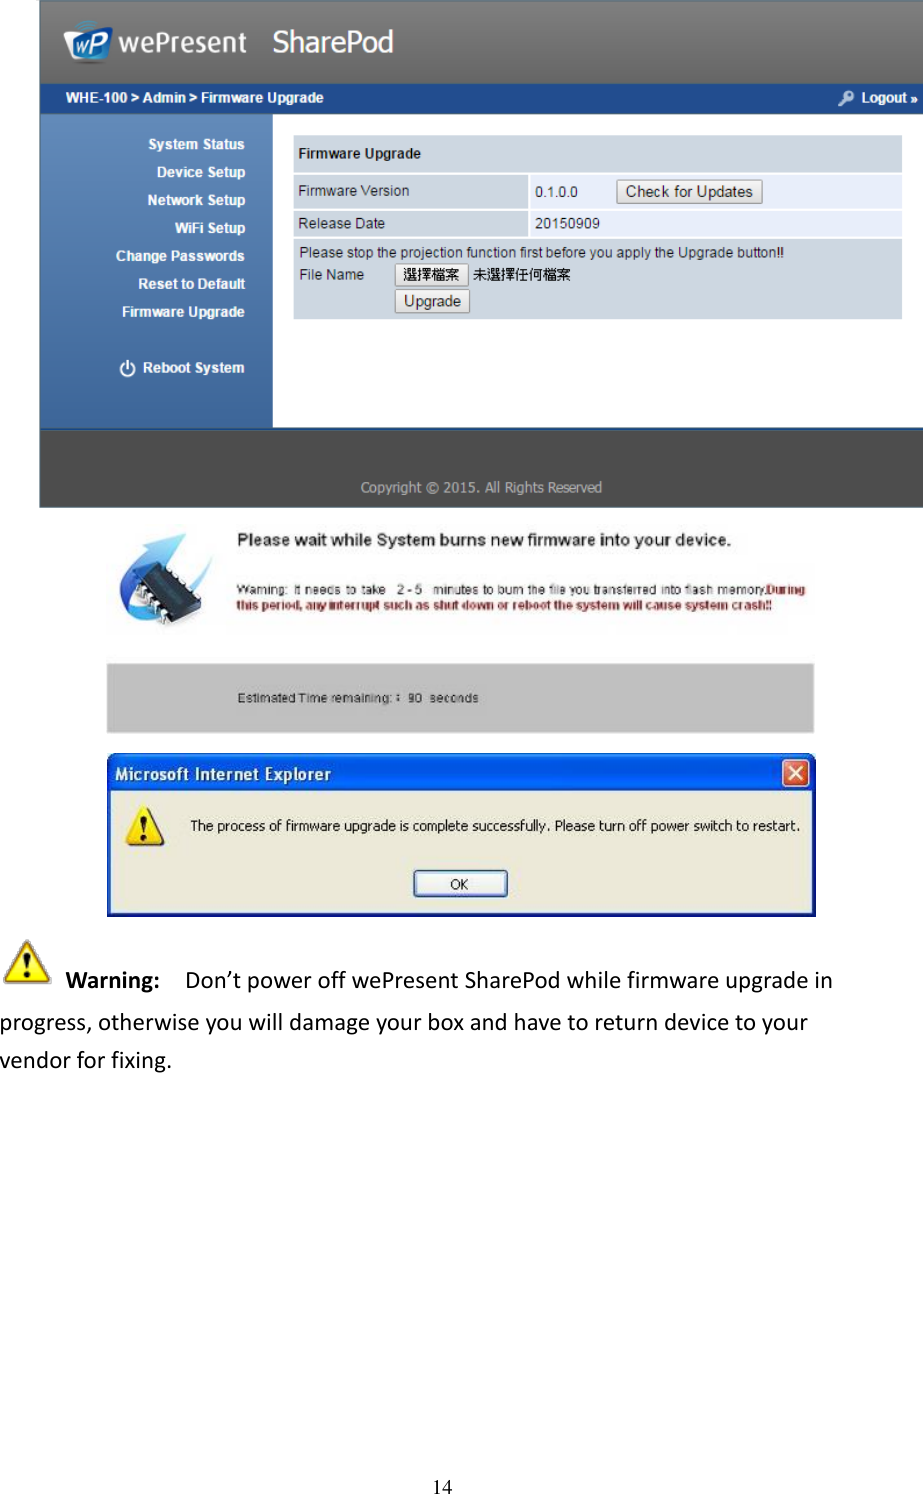   14    Warning:  Don’t power off wePresent SharePod while firmware upgrade in progress, otherwise you will damage your box and have to return device to your vendor for fixing.    